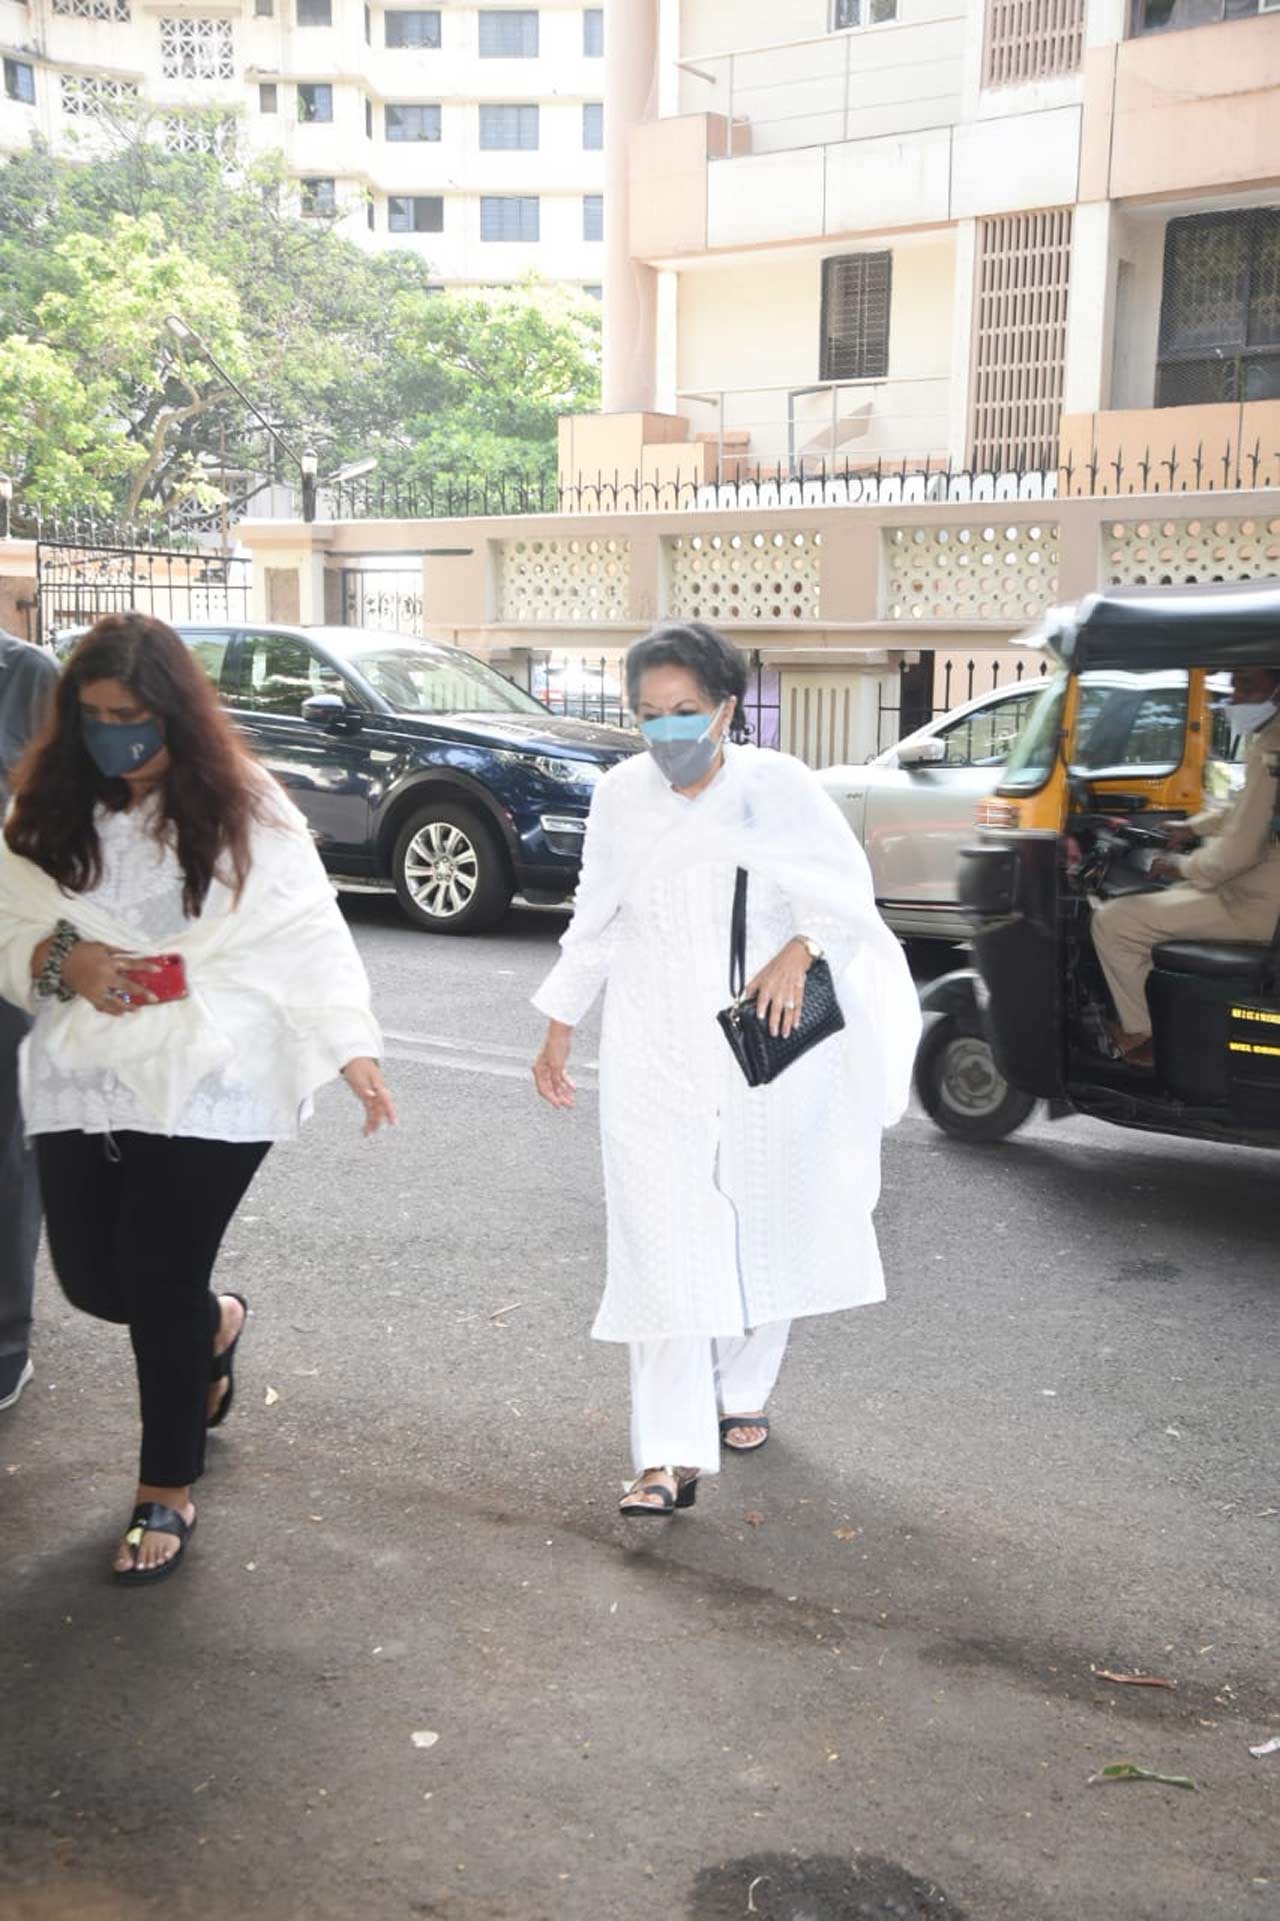 For the uninitiated, Mandira Bedi and Raj Kaushal adopted Tara during the first wave of a pandemic outbreak. The duo was excited to share the news when their younger daughter accepted them as a family. In picture: Mandira Bedi's mother also attended the prayer meet.